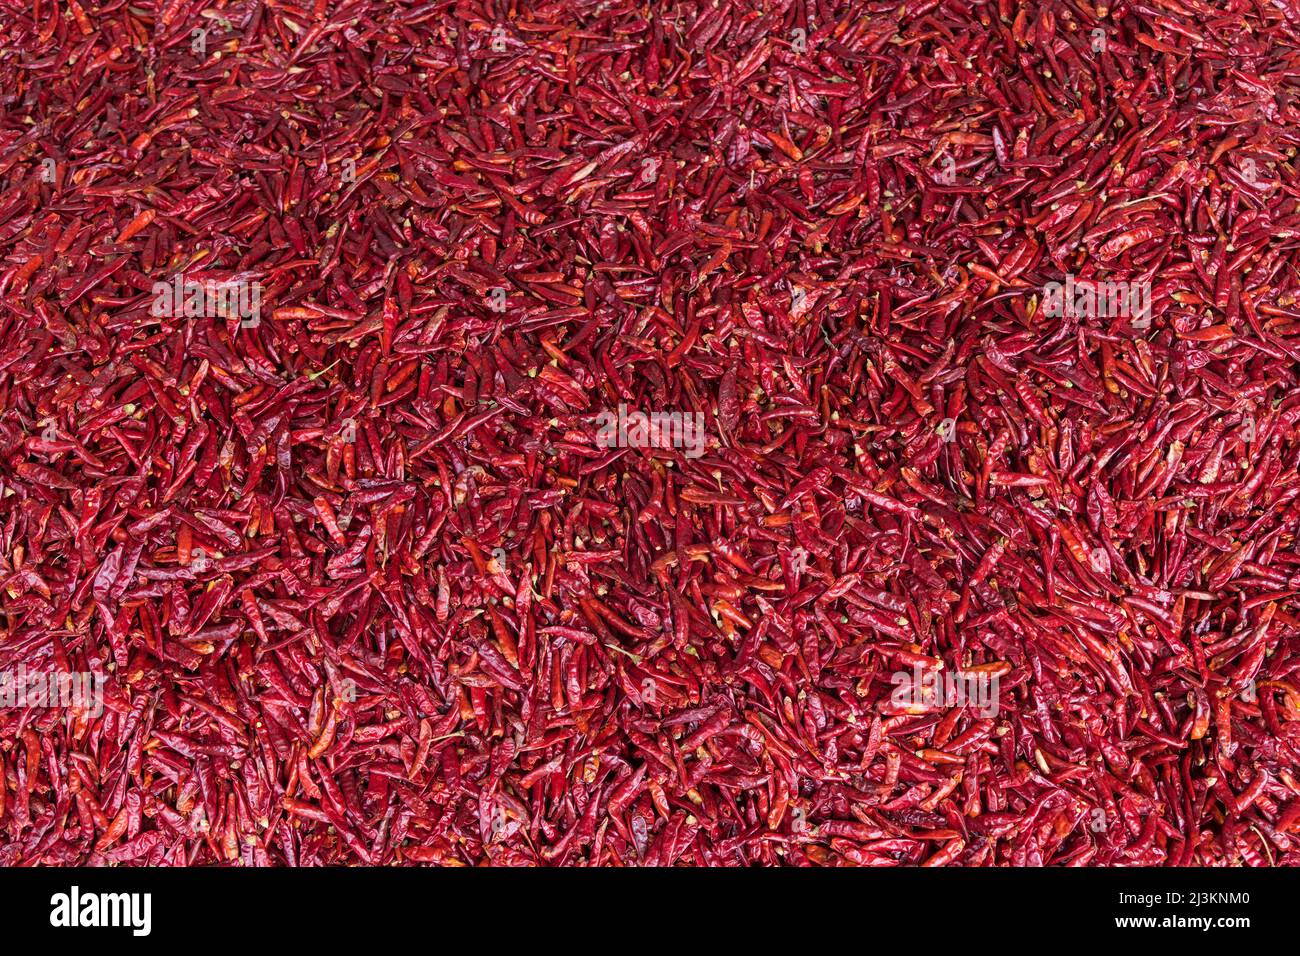 Red chillies (Capsicum) for sale in Chengdu Market; Sichuan, China Stock Photo